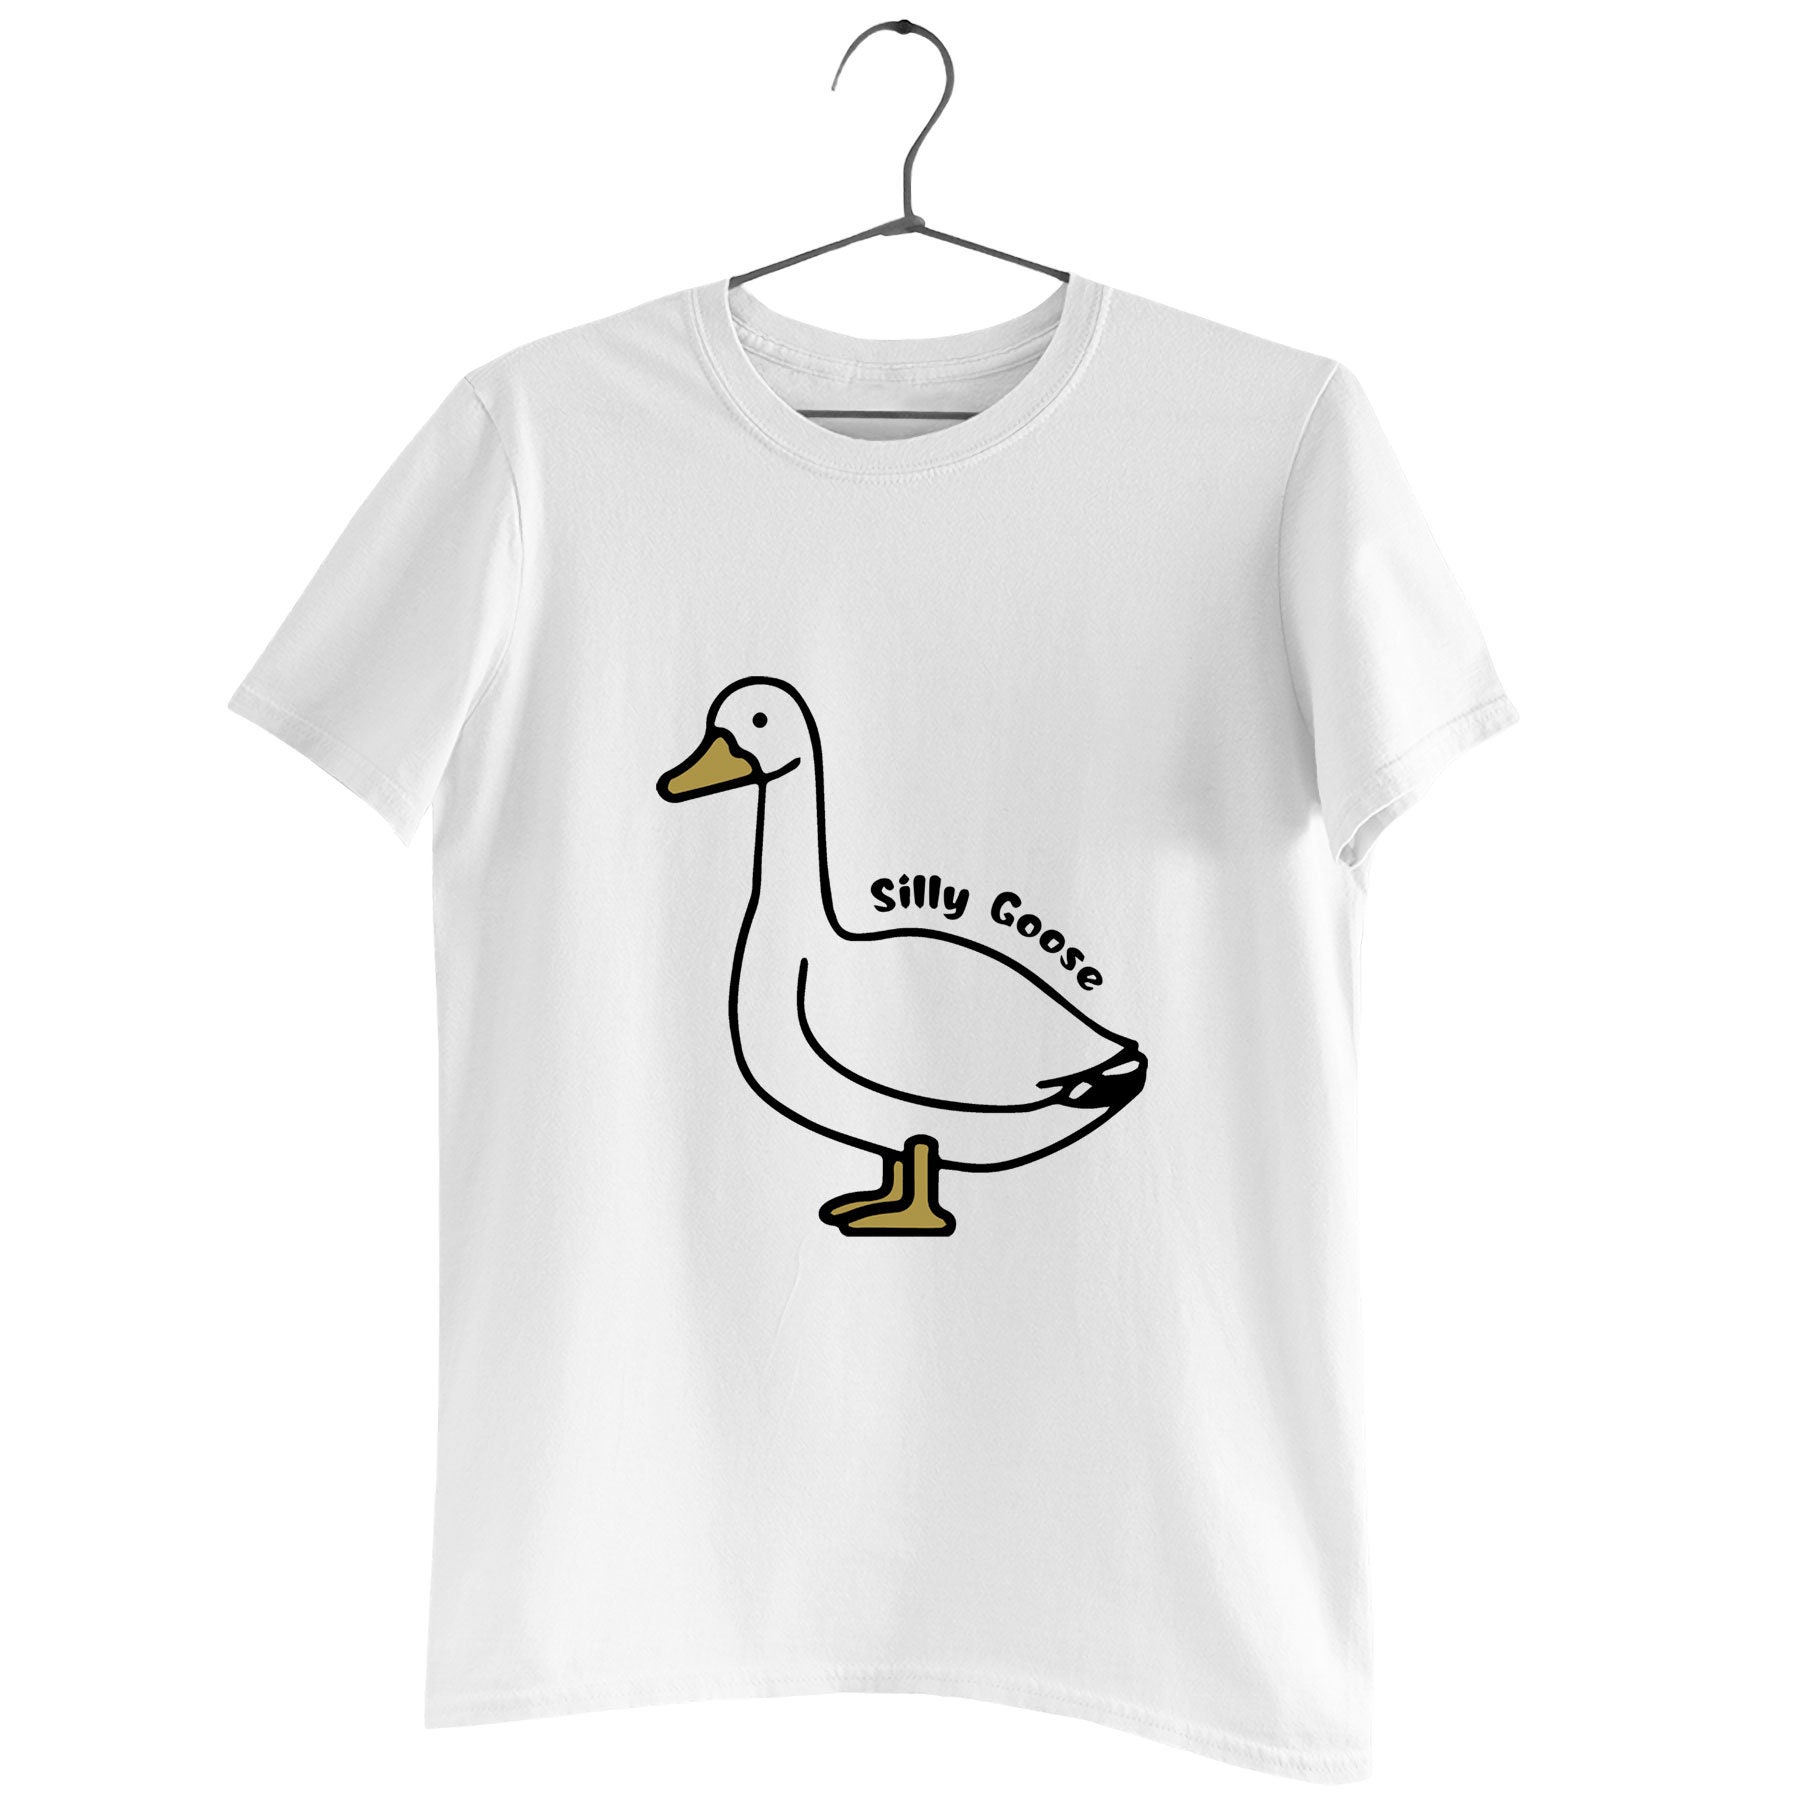 Discover Silly Goose Tee, Goose Tee, Silly Goose Shirt, Funny T-Shirt